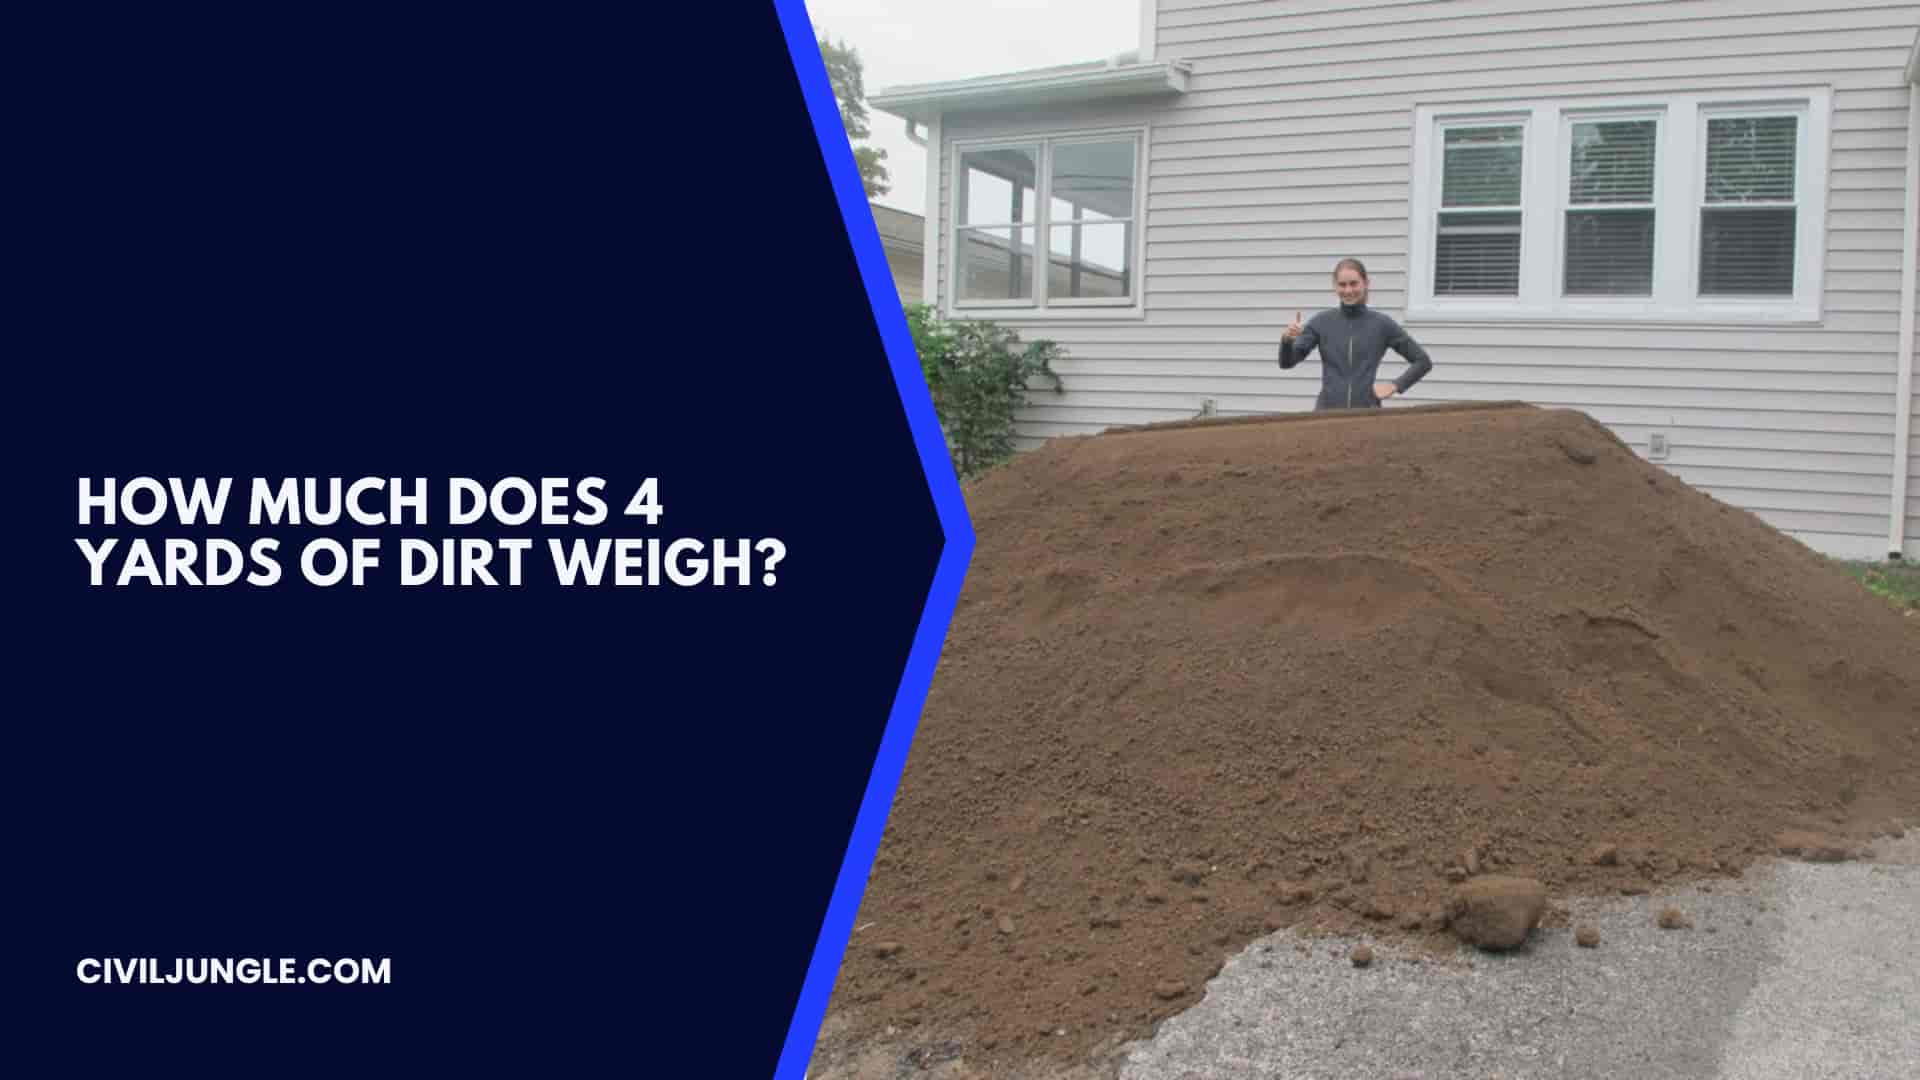 How Much Does 4 Yards of Dirt Weigh?